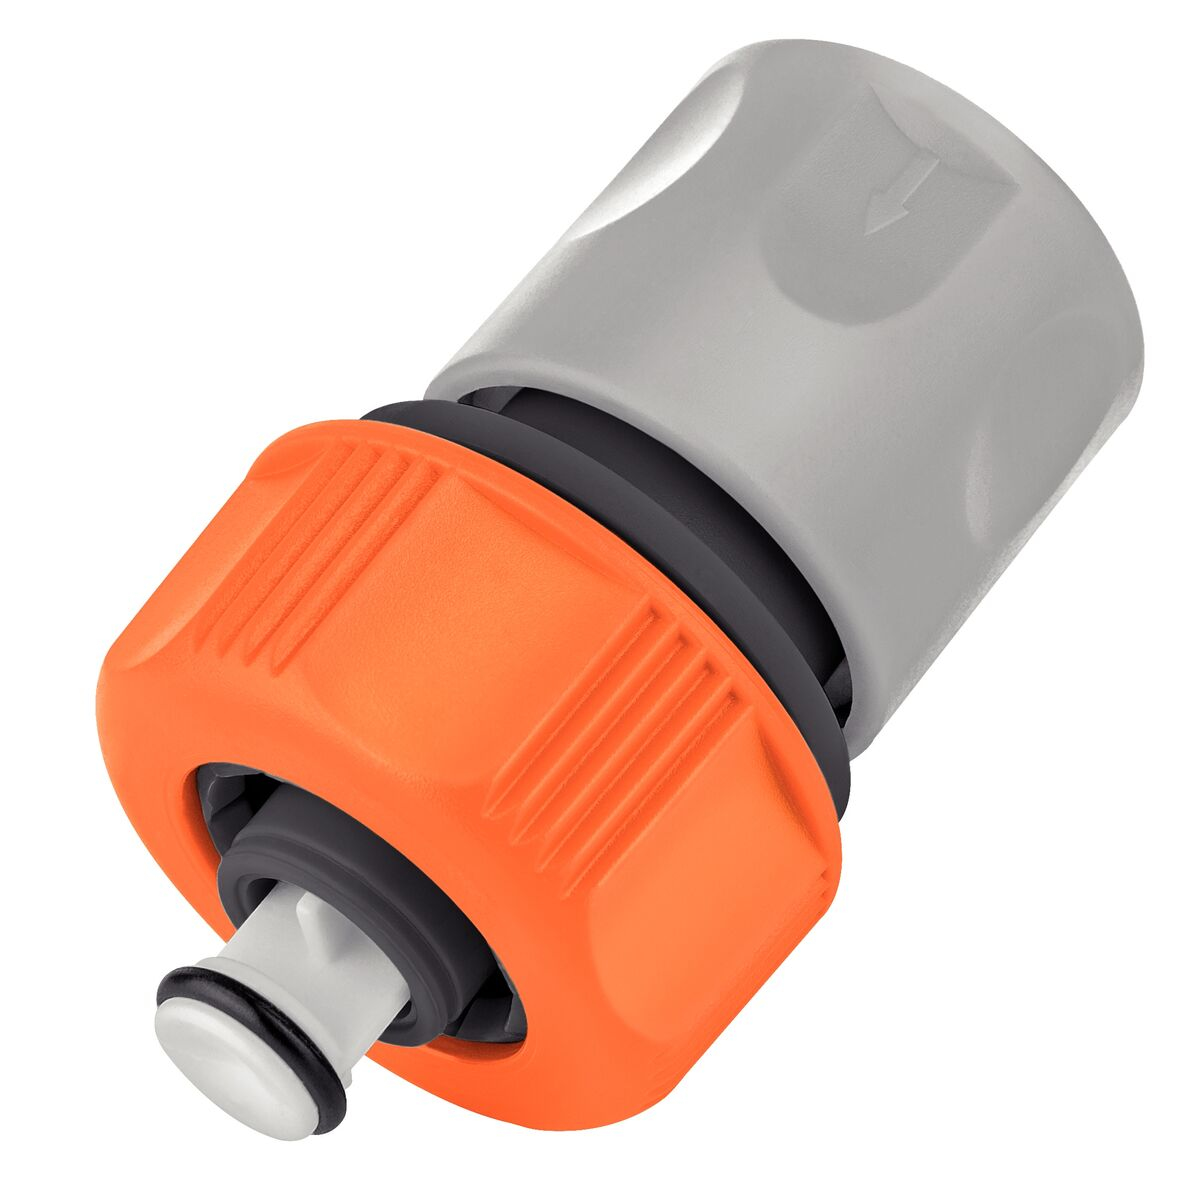 Tramontina Plastic Quick Connector with Aquastop for 5/8" and 3/4" Hoses